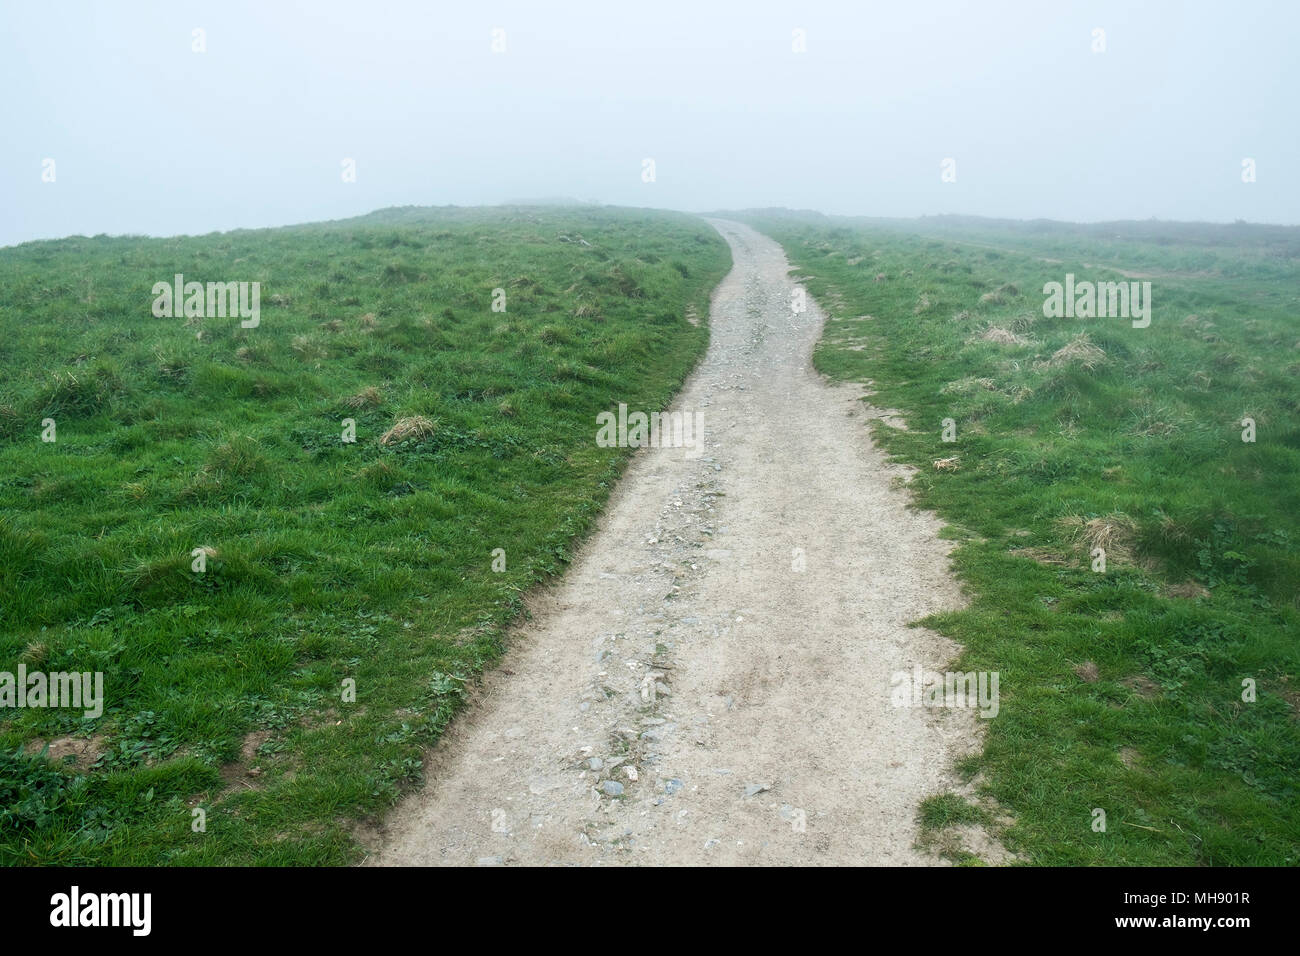 UK weather - Coastal mist over a rocky track on East Pentire in Newquay Cornwall. Stock Photo